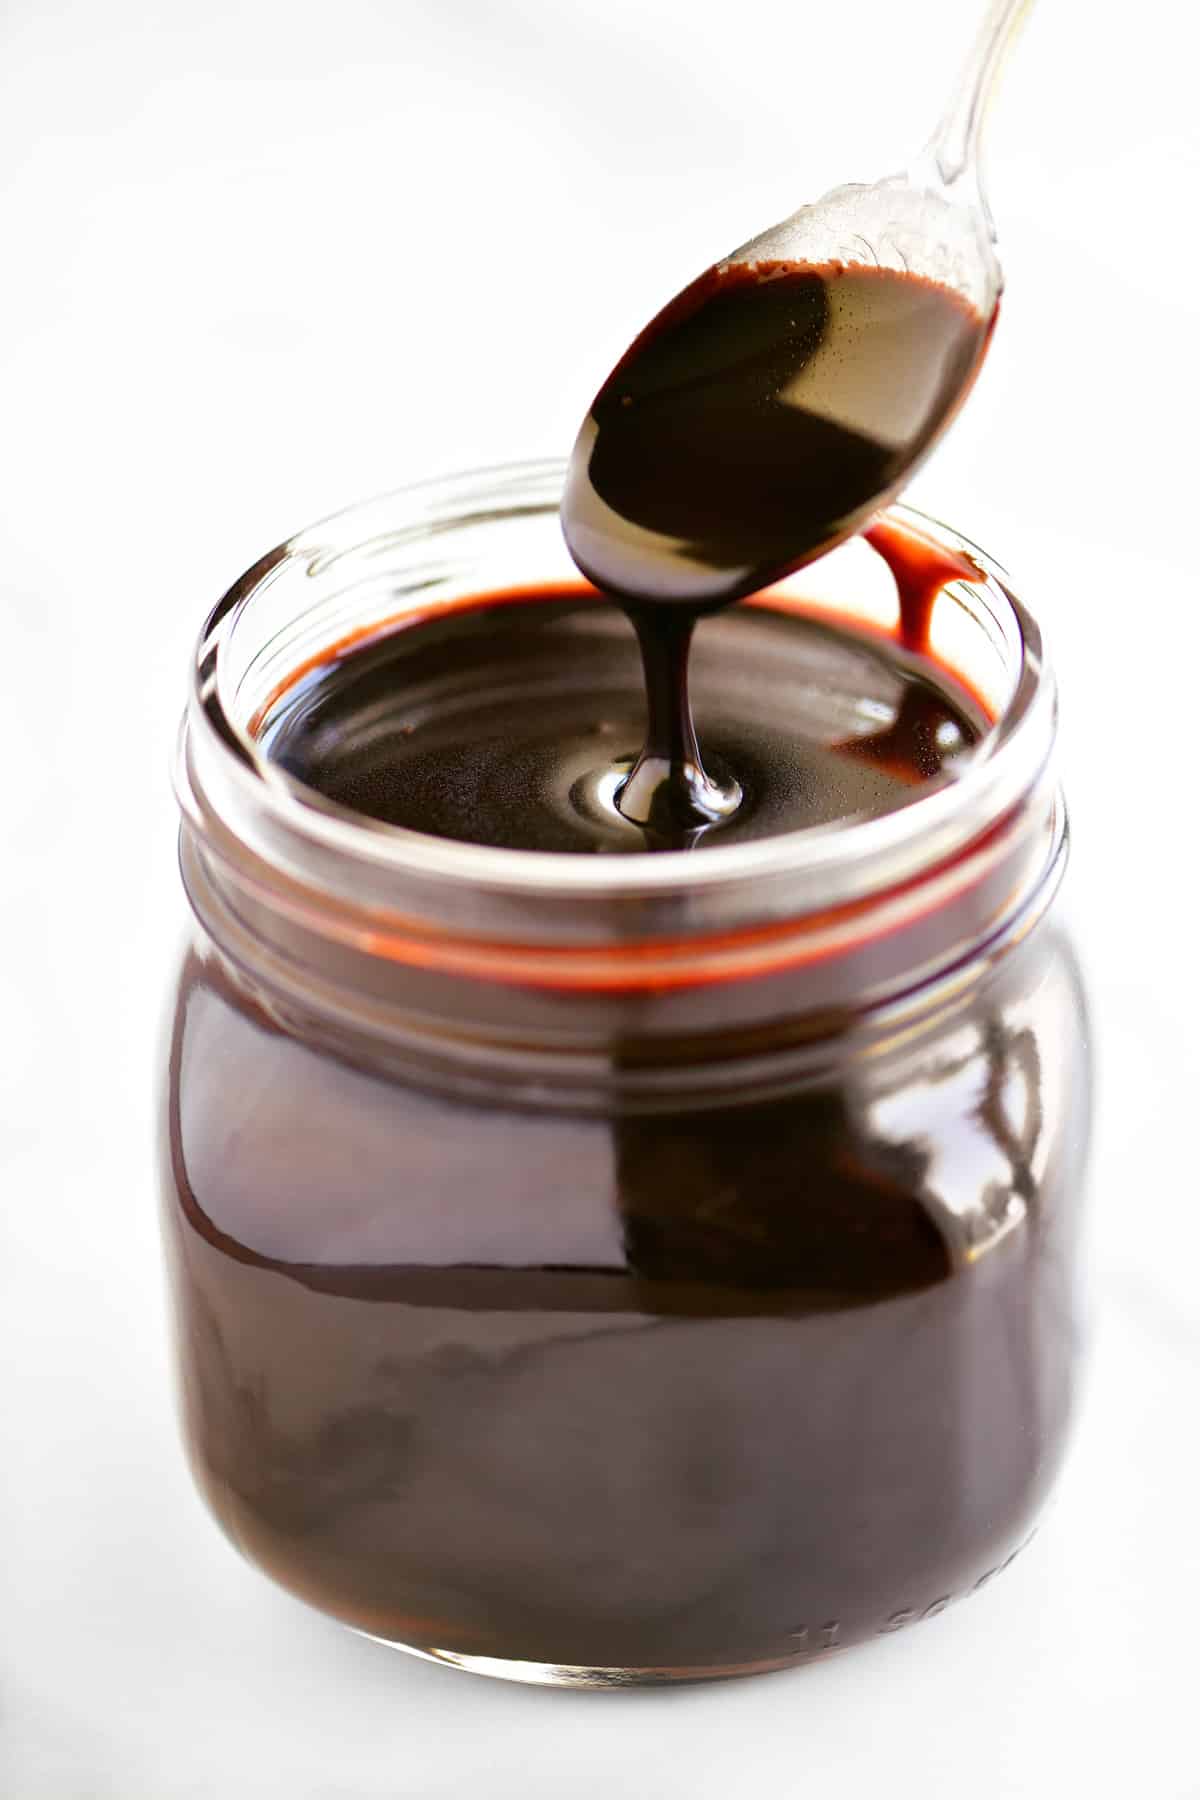 dipping a spoon in a jar of chocolate sauce